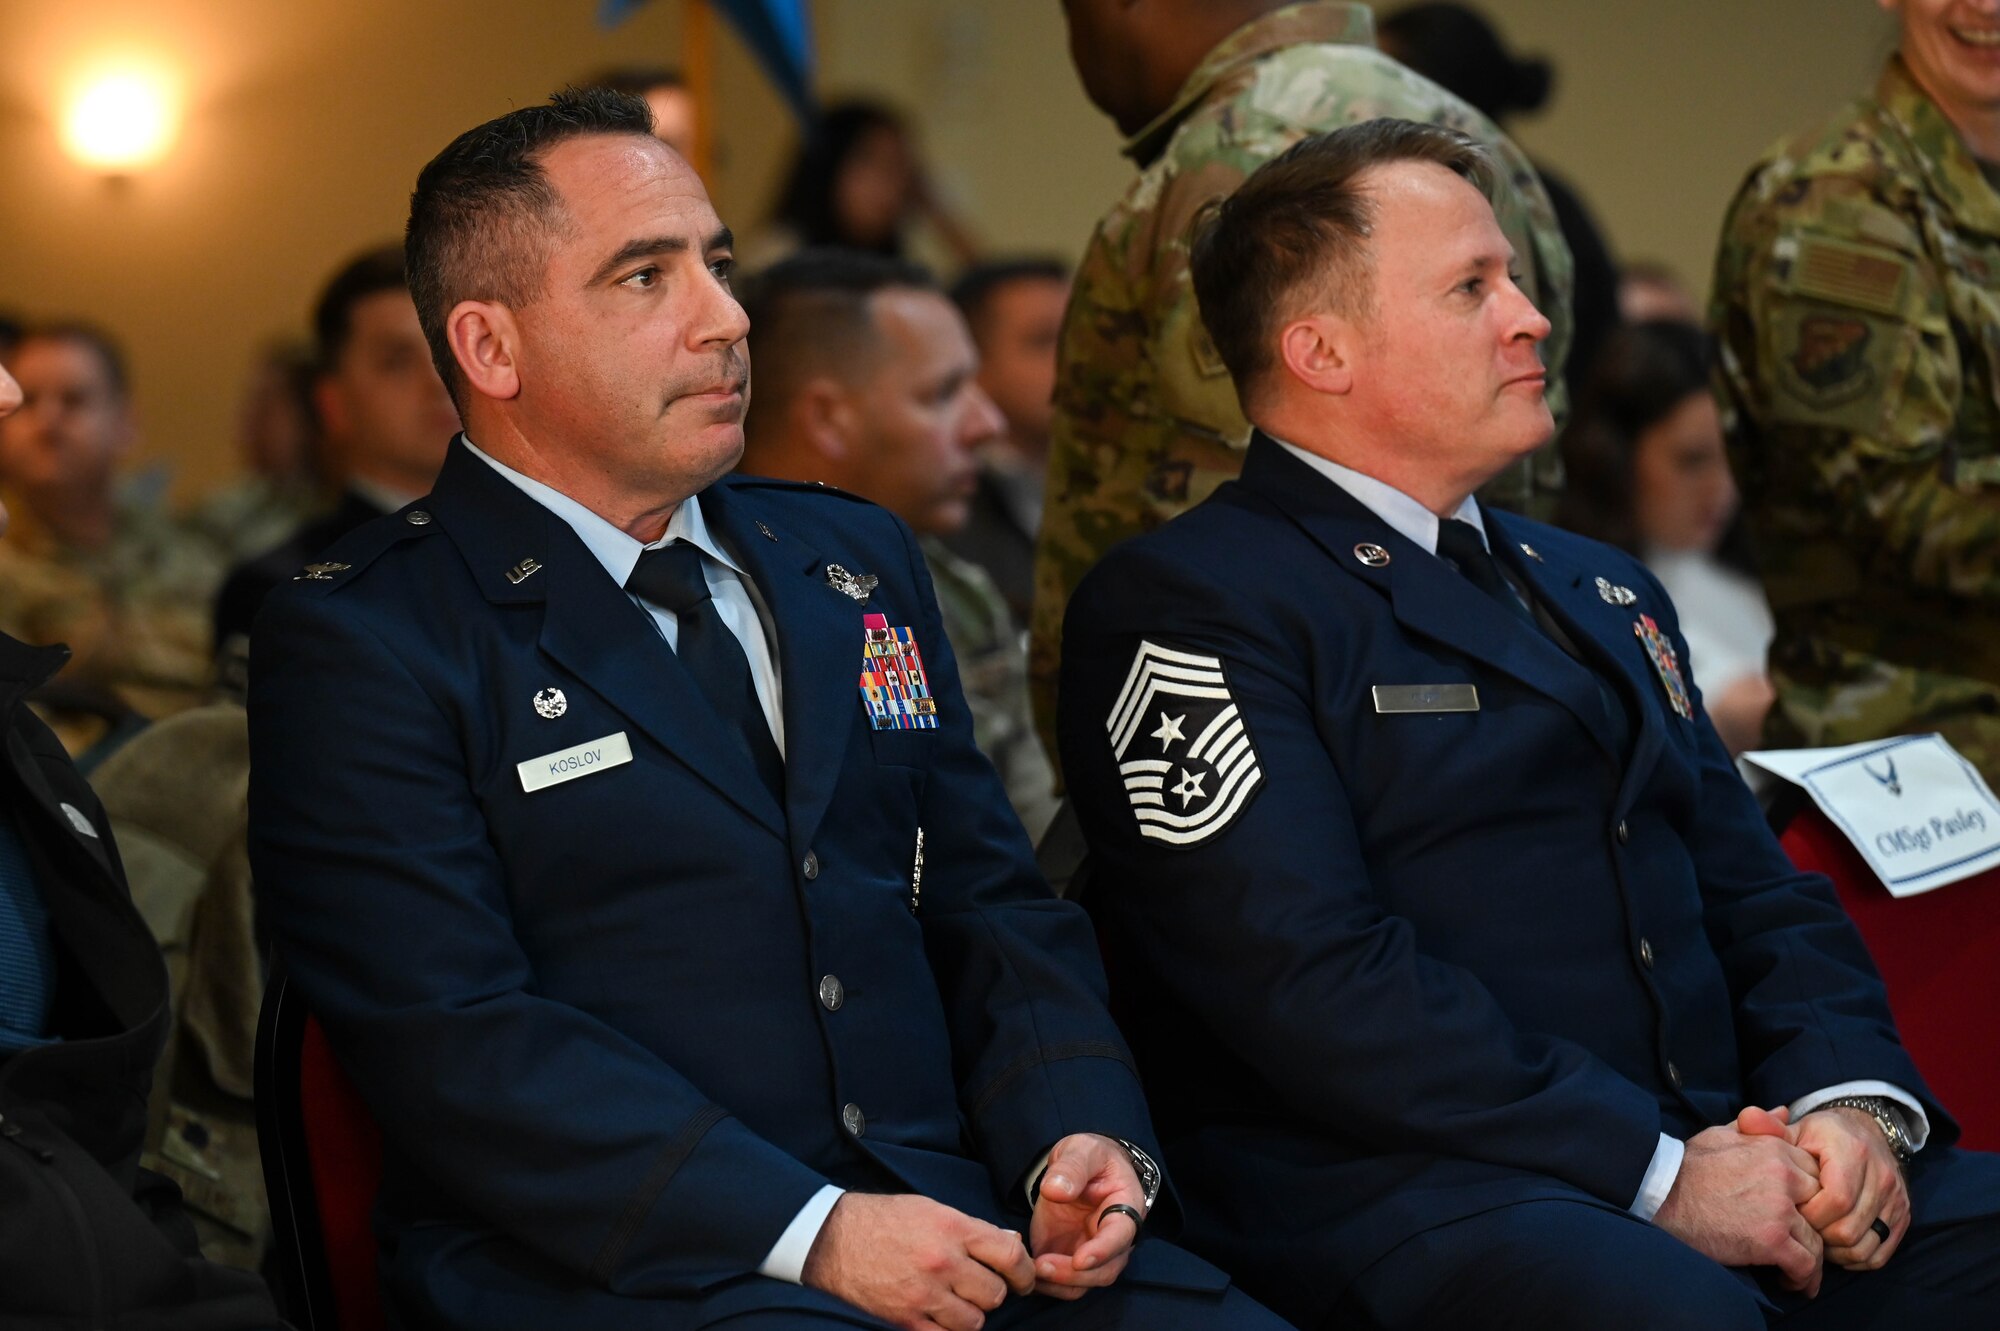 U.S. Air Force Col. Josh Koslov, 350th Spectrum Warfare Wing commander, left, and U.S. Air Force Chief Master Sgt. Will Cupp, 350th SWW command chief, right, attend the Airman Leadership School Class 24-Alpha graduation ceremony at Eglin Air Force Base, Fla., Dec. 7, 2023. The 350th SWW sponsored class 24-A and had the opportunity to speak to the students during their course, present the awards at graduation and give closing remarks. (U.S. Air Force photo by Capt. Benjamin Aronson)